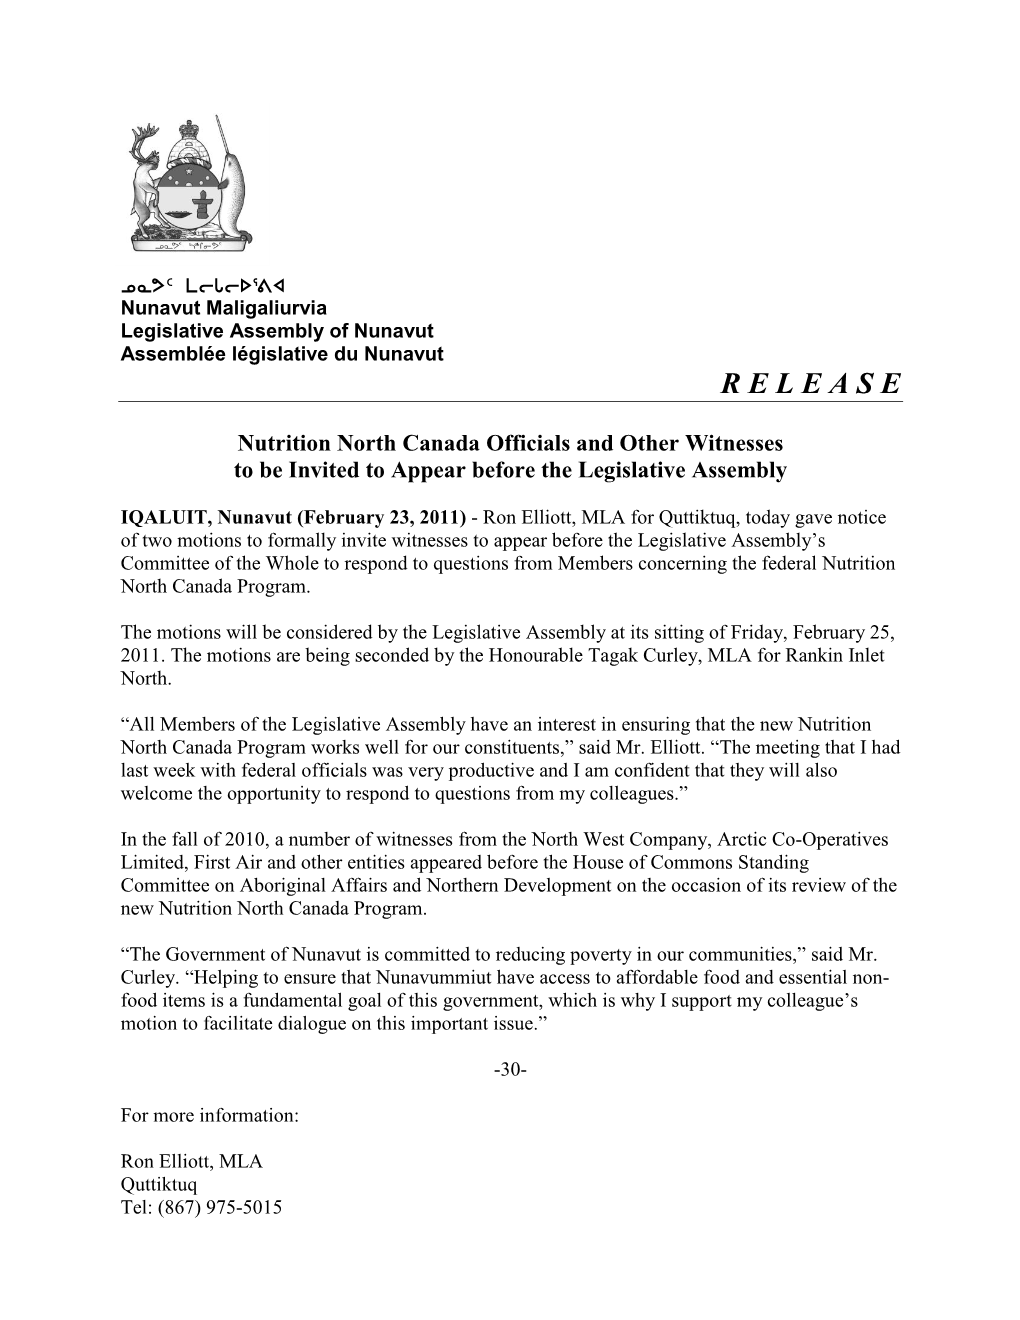 Nutrition North Canada Officials and Other Witnesses to Be Invited to Appear Before the Legislative Assembly